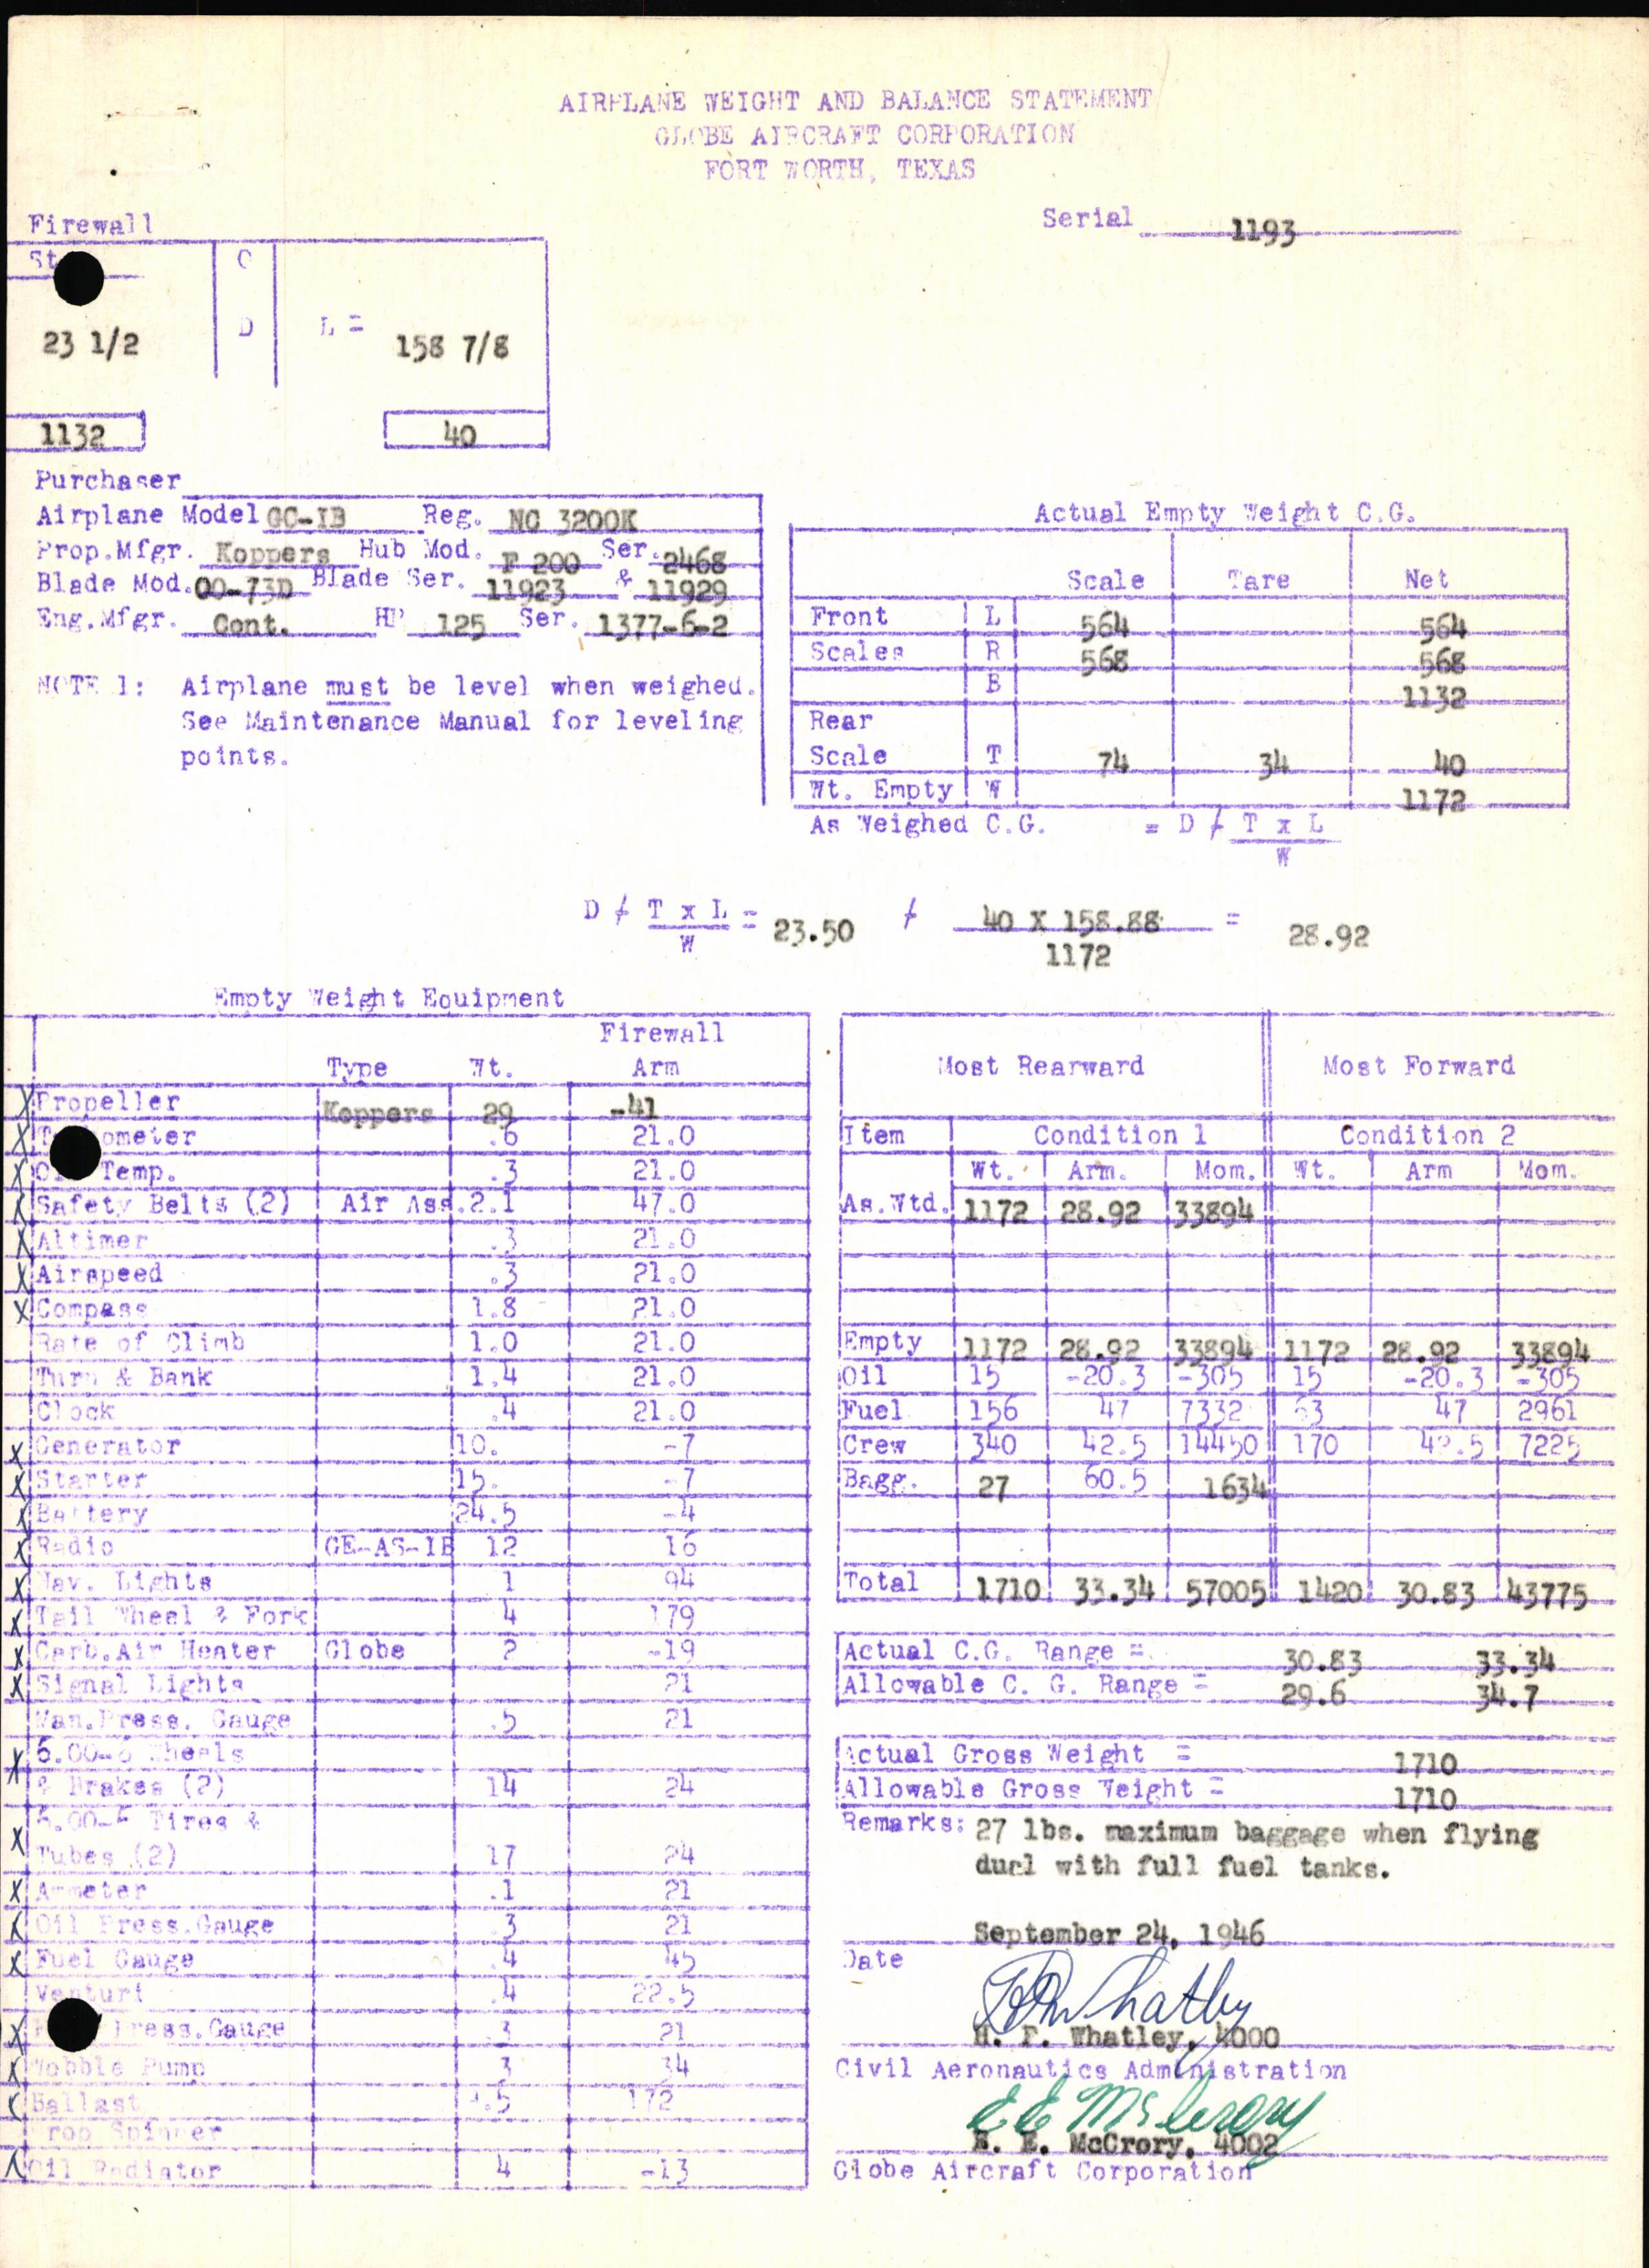 Sample page 5 from AirCorps Library document: Technical Information for Serial Number 1193